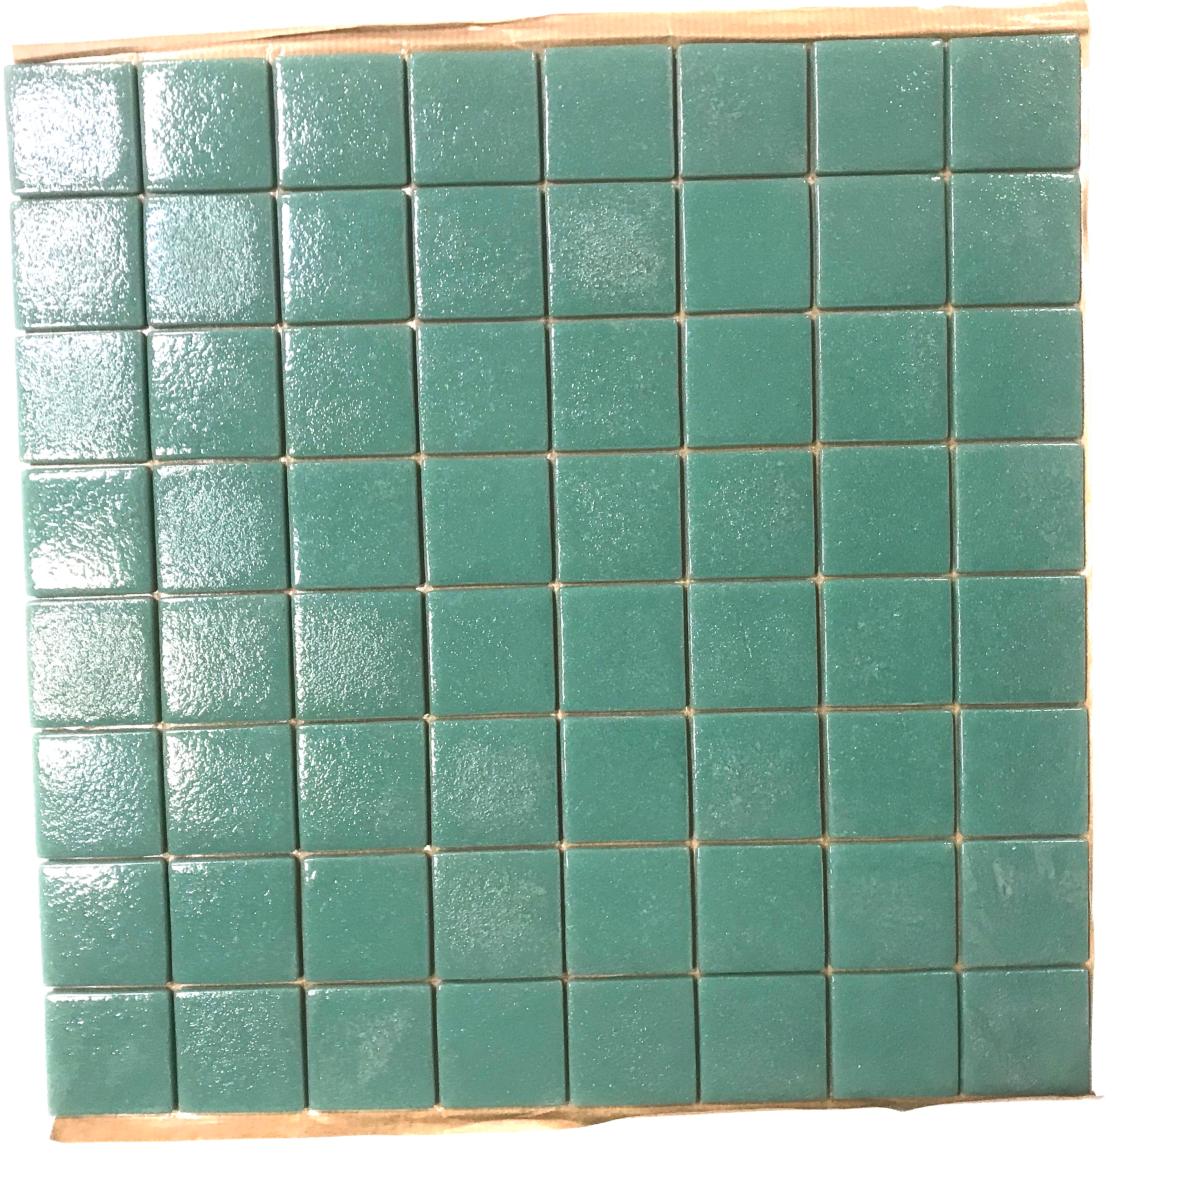 https://www.made-in-mosaic.fr/Files/16786/Img/09/mosaique-4-cm-p000119-vert-turquoise-antide-rapant-zoom.jpg